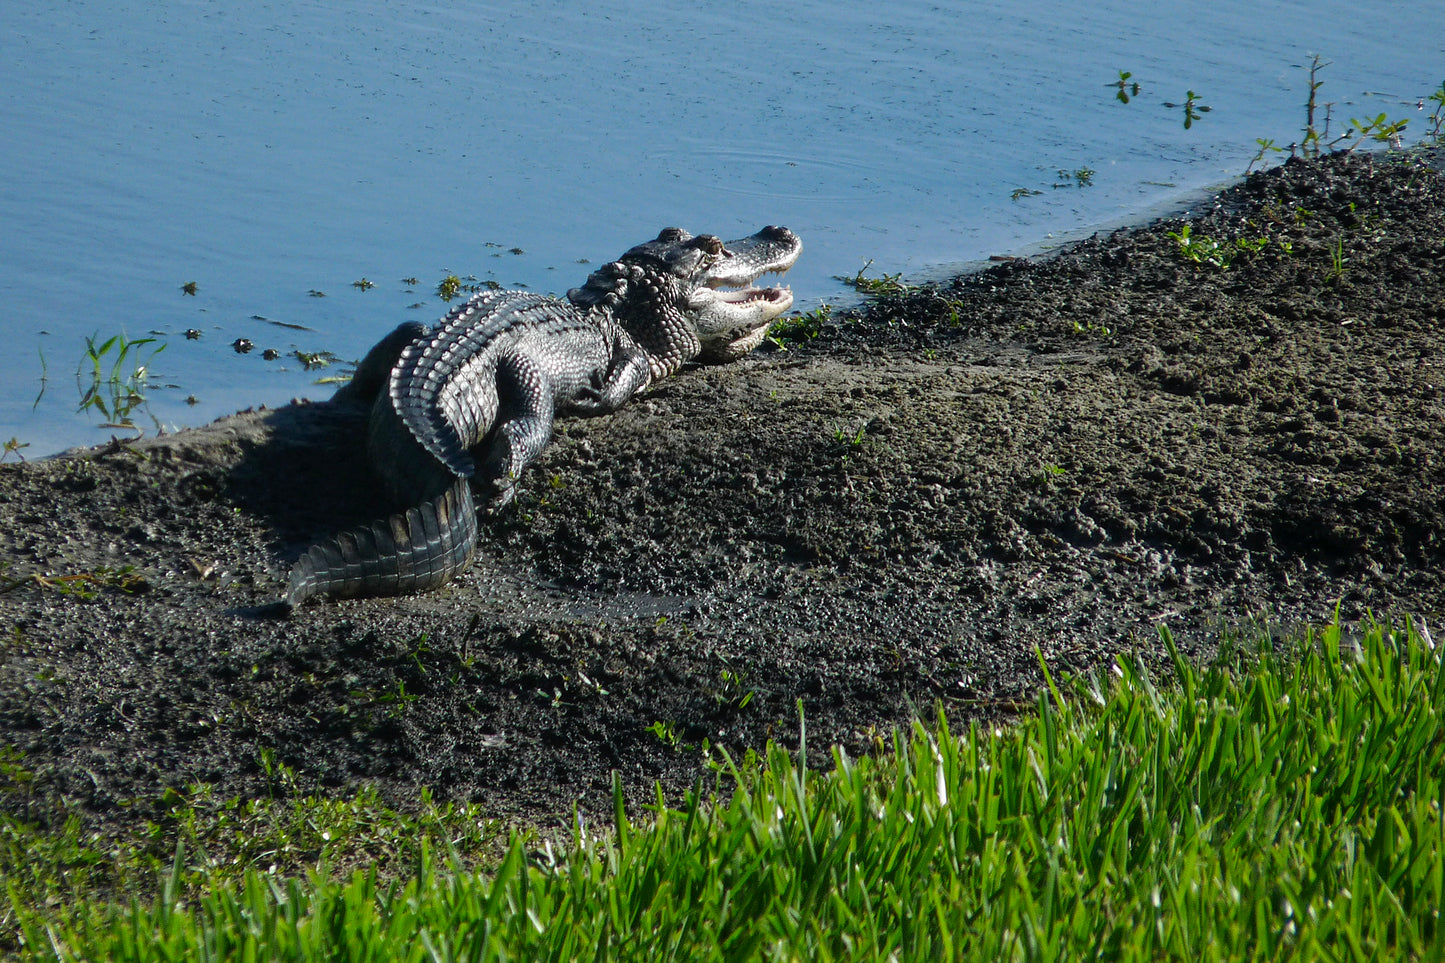 Alligator on the Bank Greeting Card